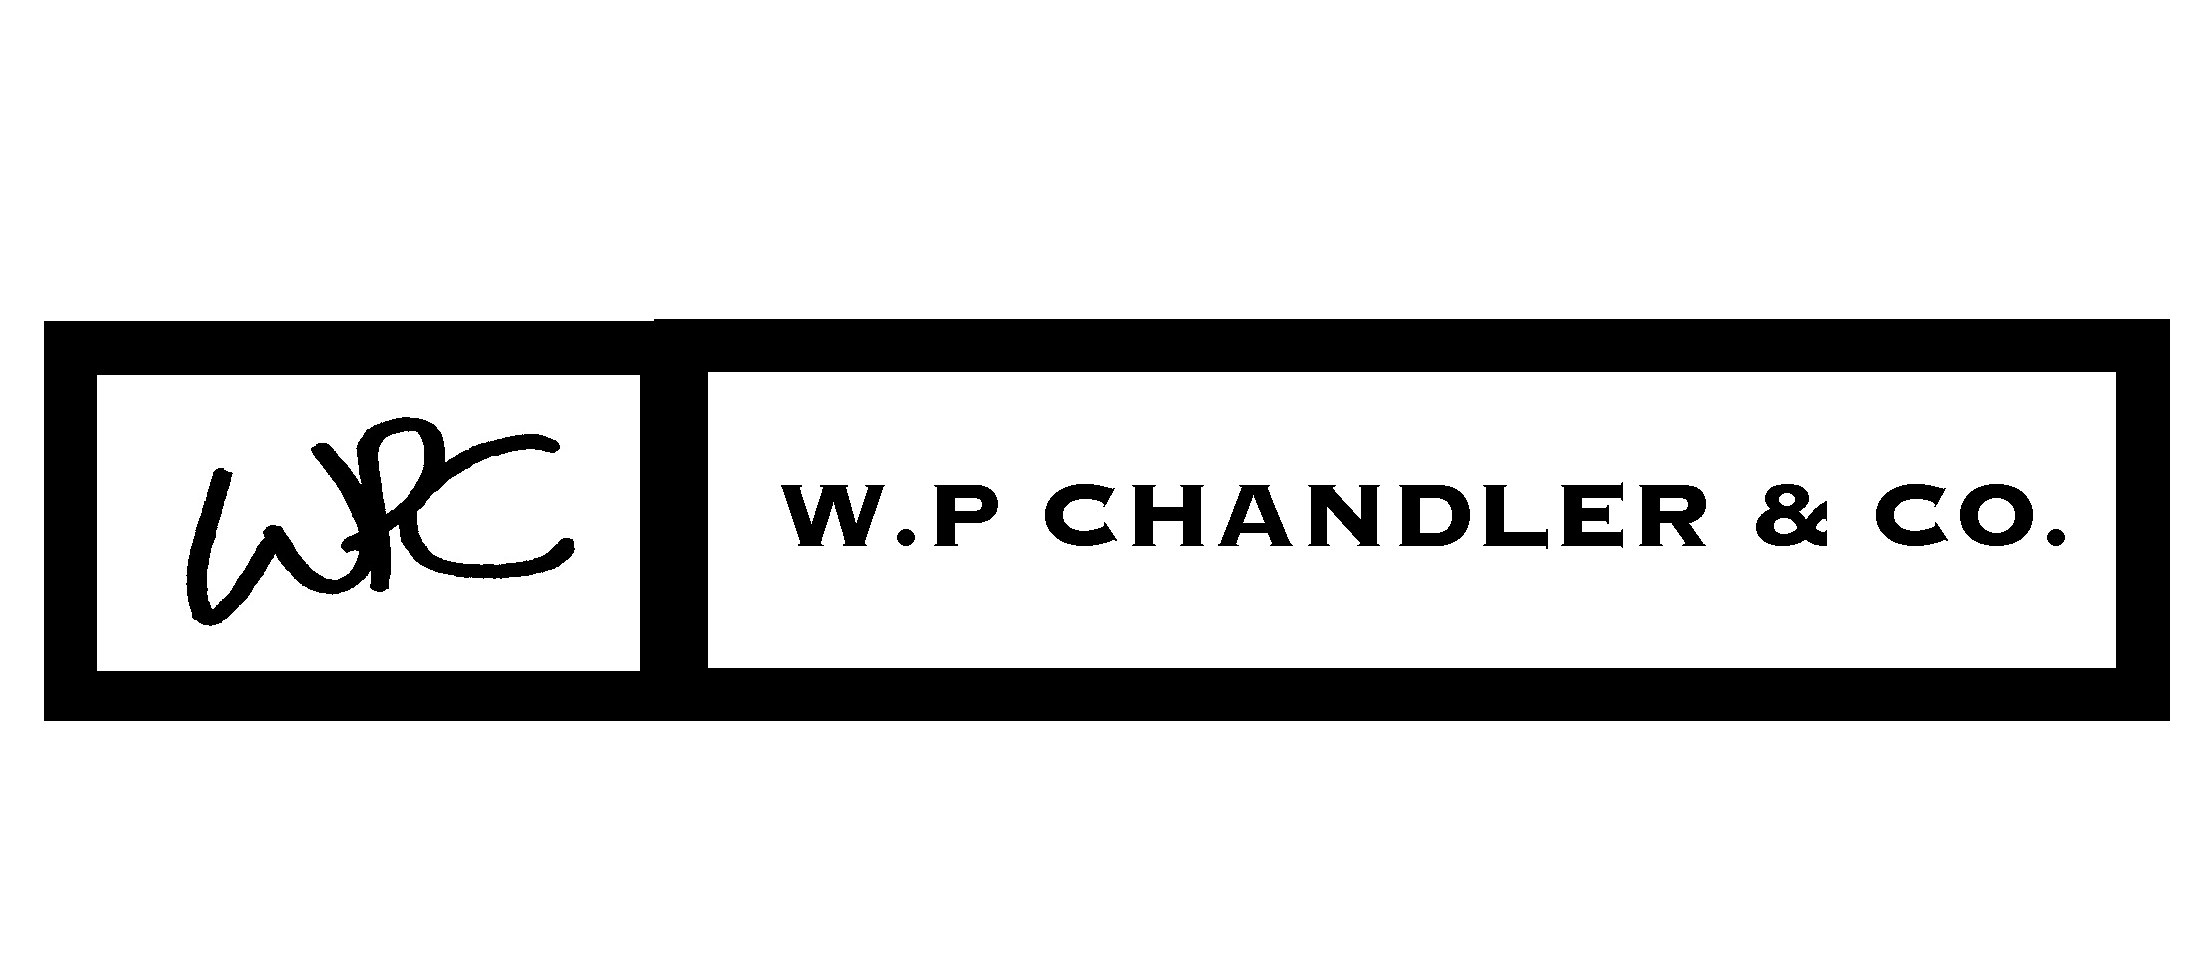 W. P. Chandler & Co.